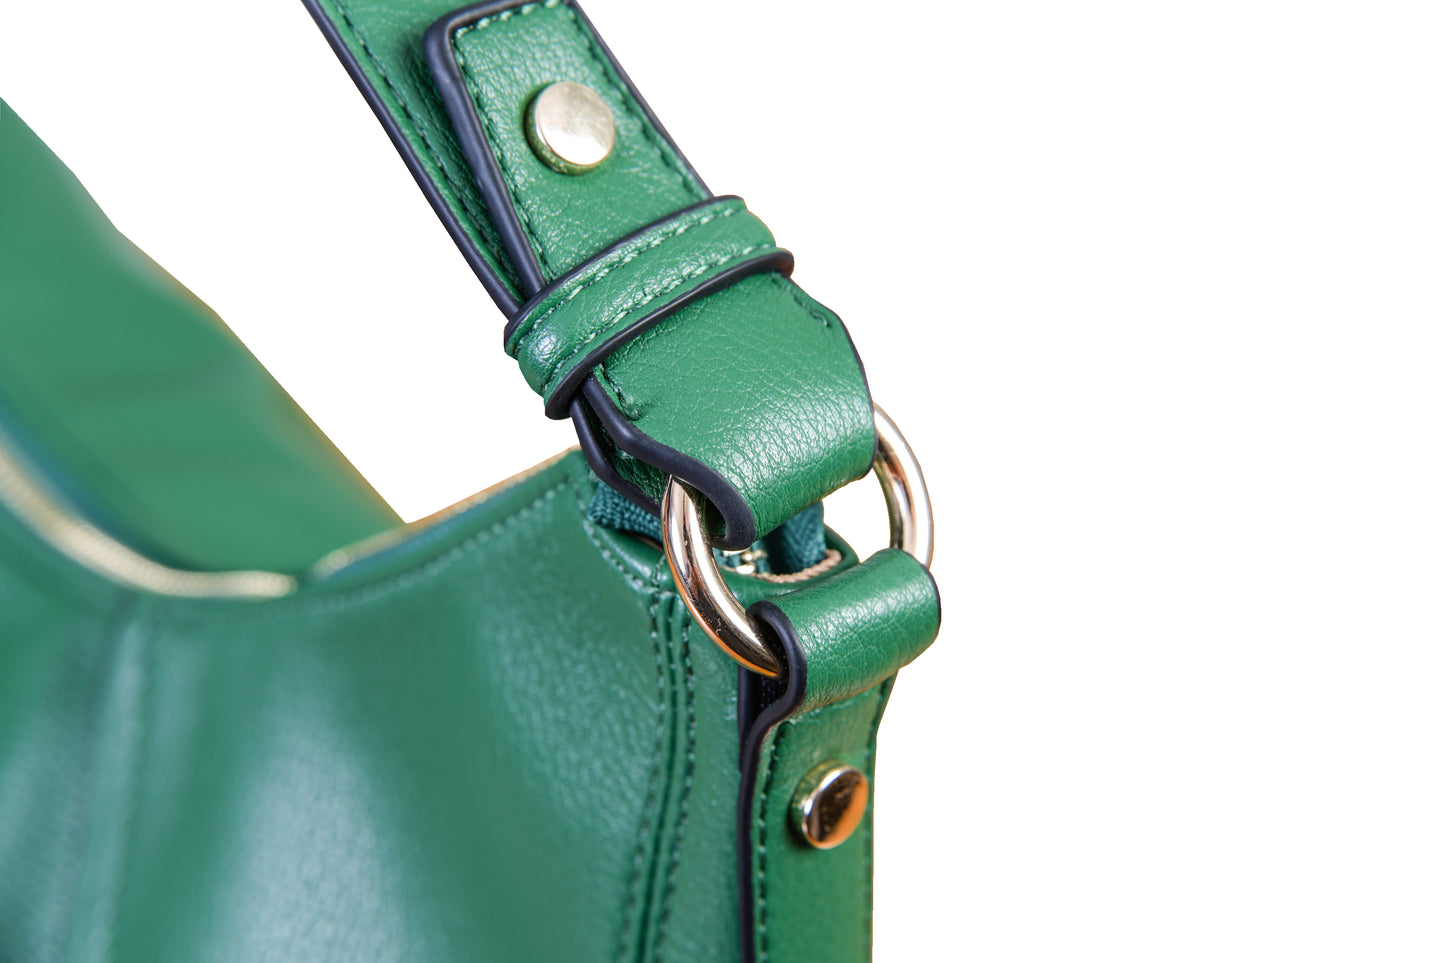 Luna Green Crescent Pebble Grain Faux Leather Handbag made by Dewi Maya strap attachment available at the best boutique in Upstate South Carolina Spartanburg Greenville Dewi Maya Boutique